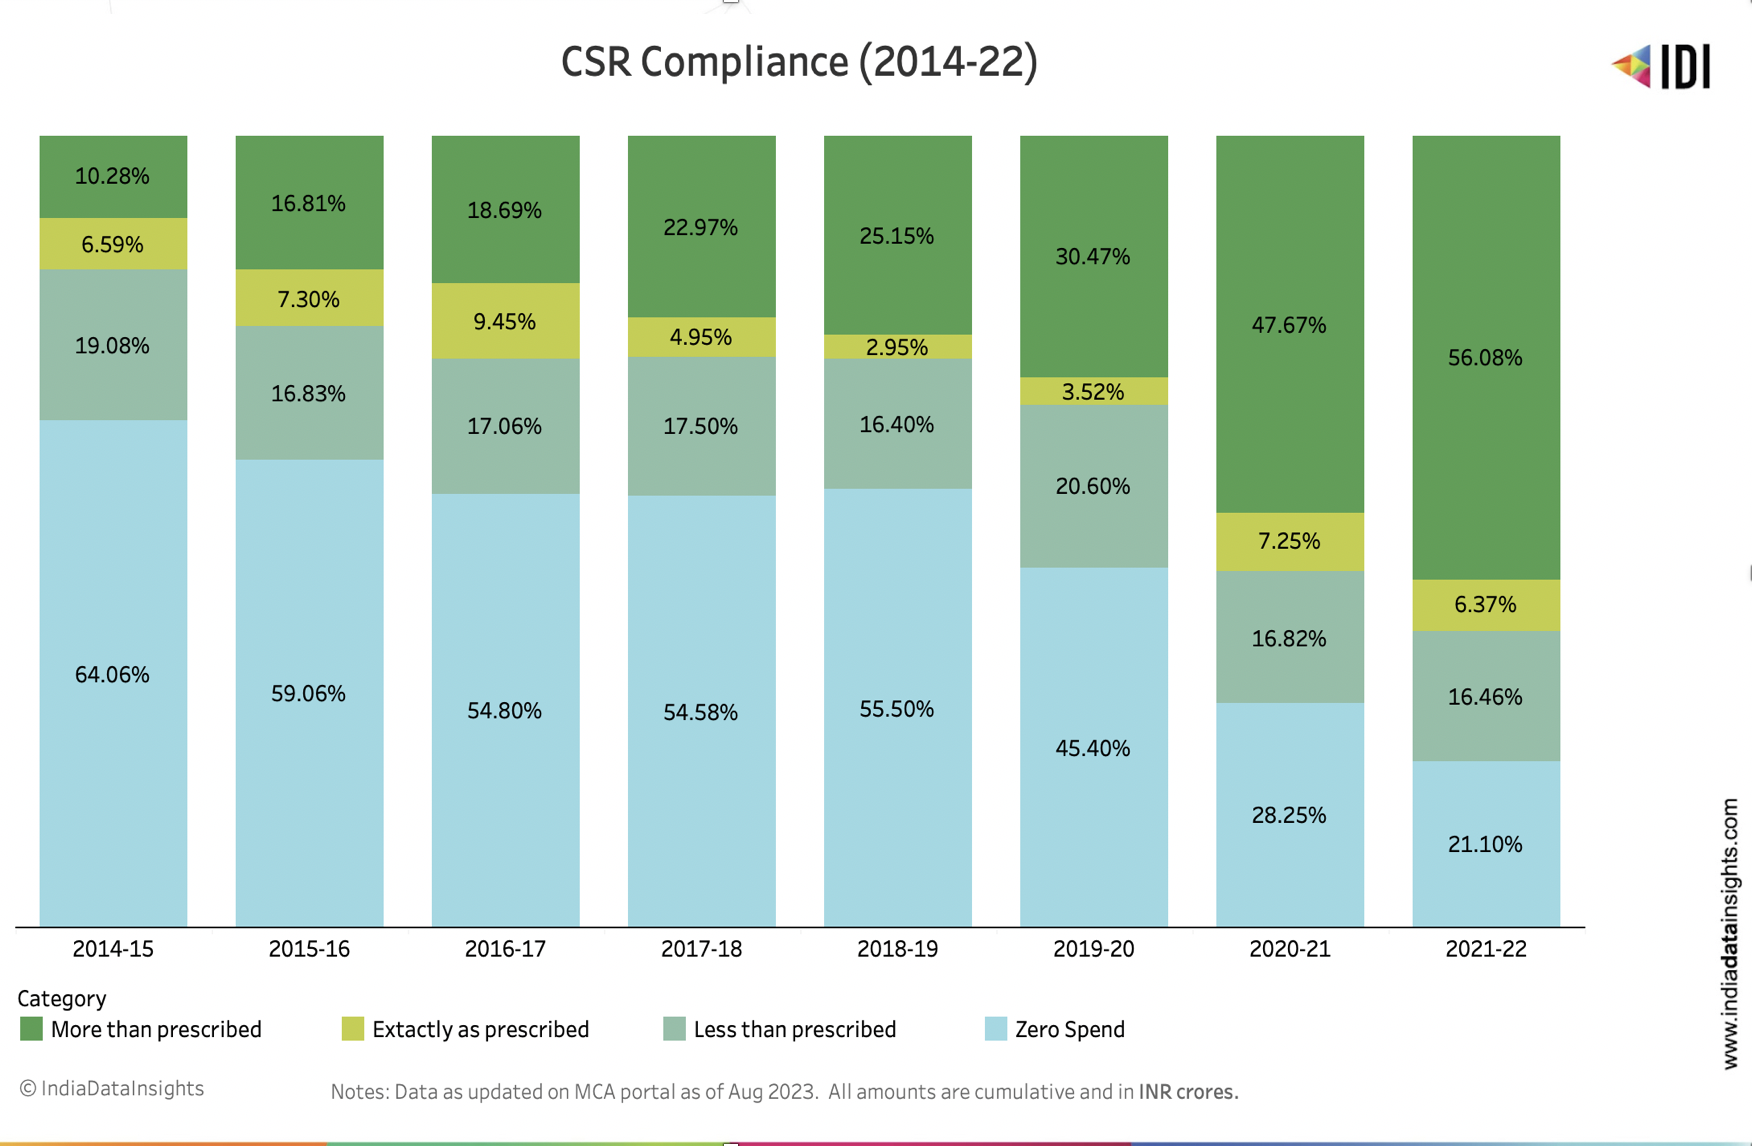 Share of companies by CSR compliance